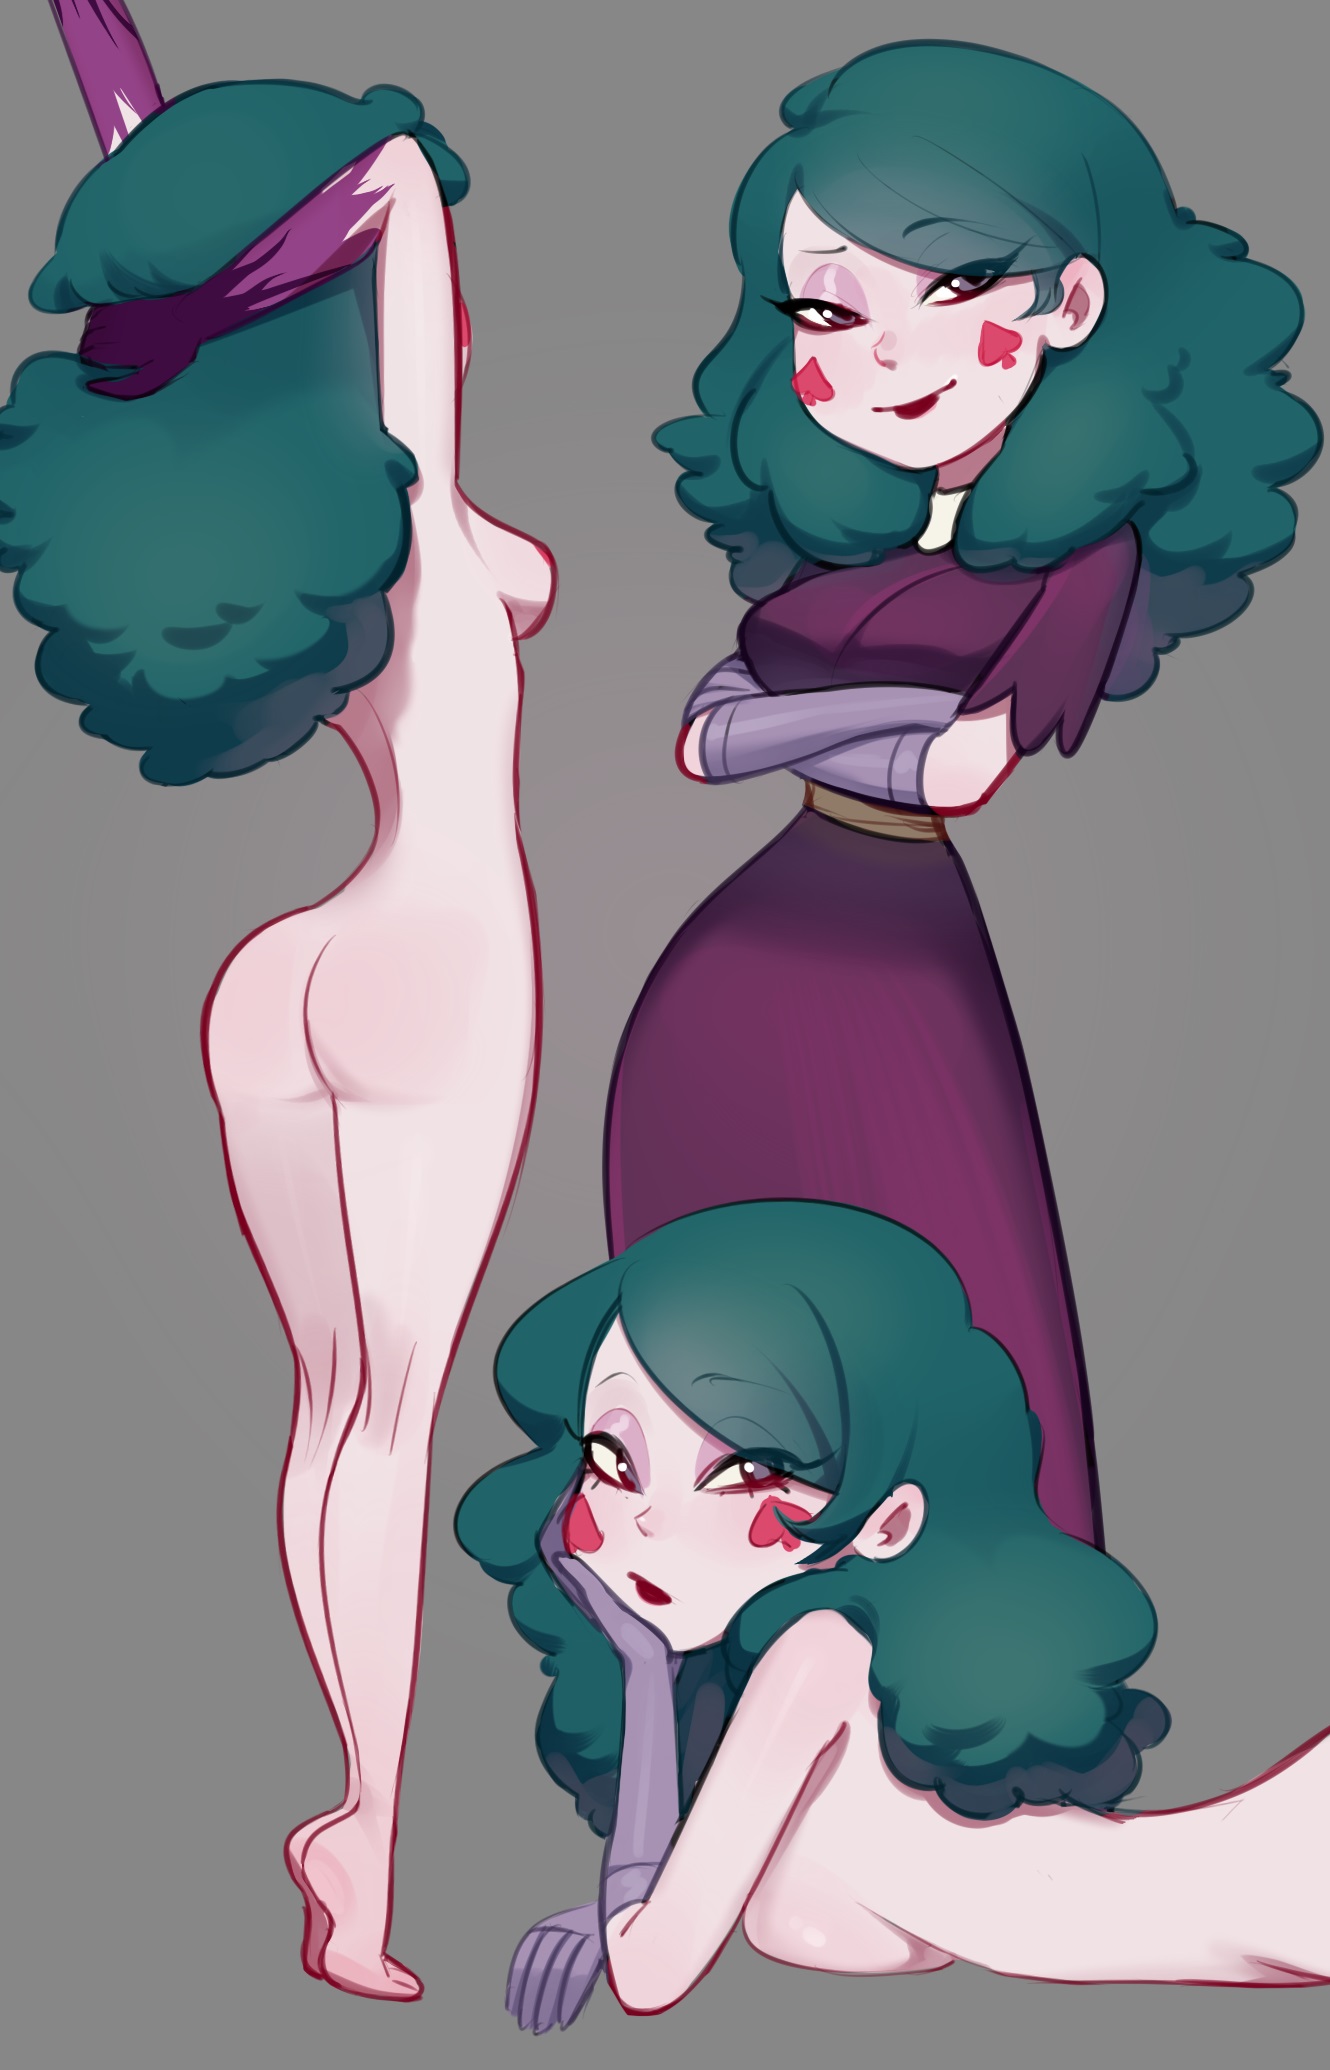 Star vs The Forces of Evil Rule 34 Two - Eclipsa and Celena.